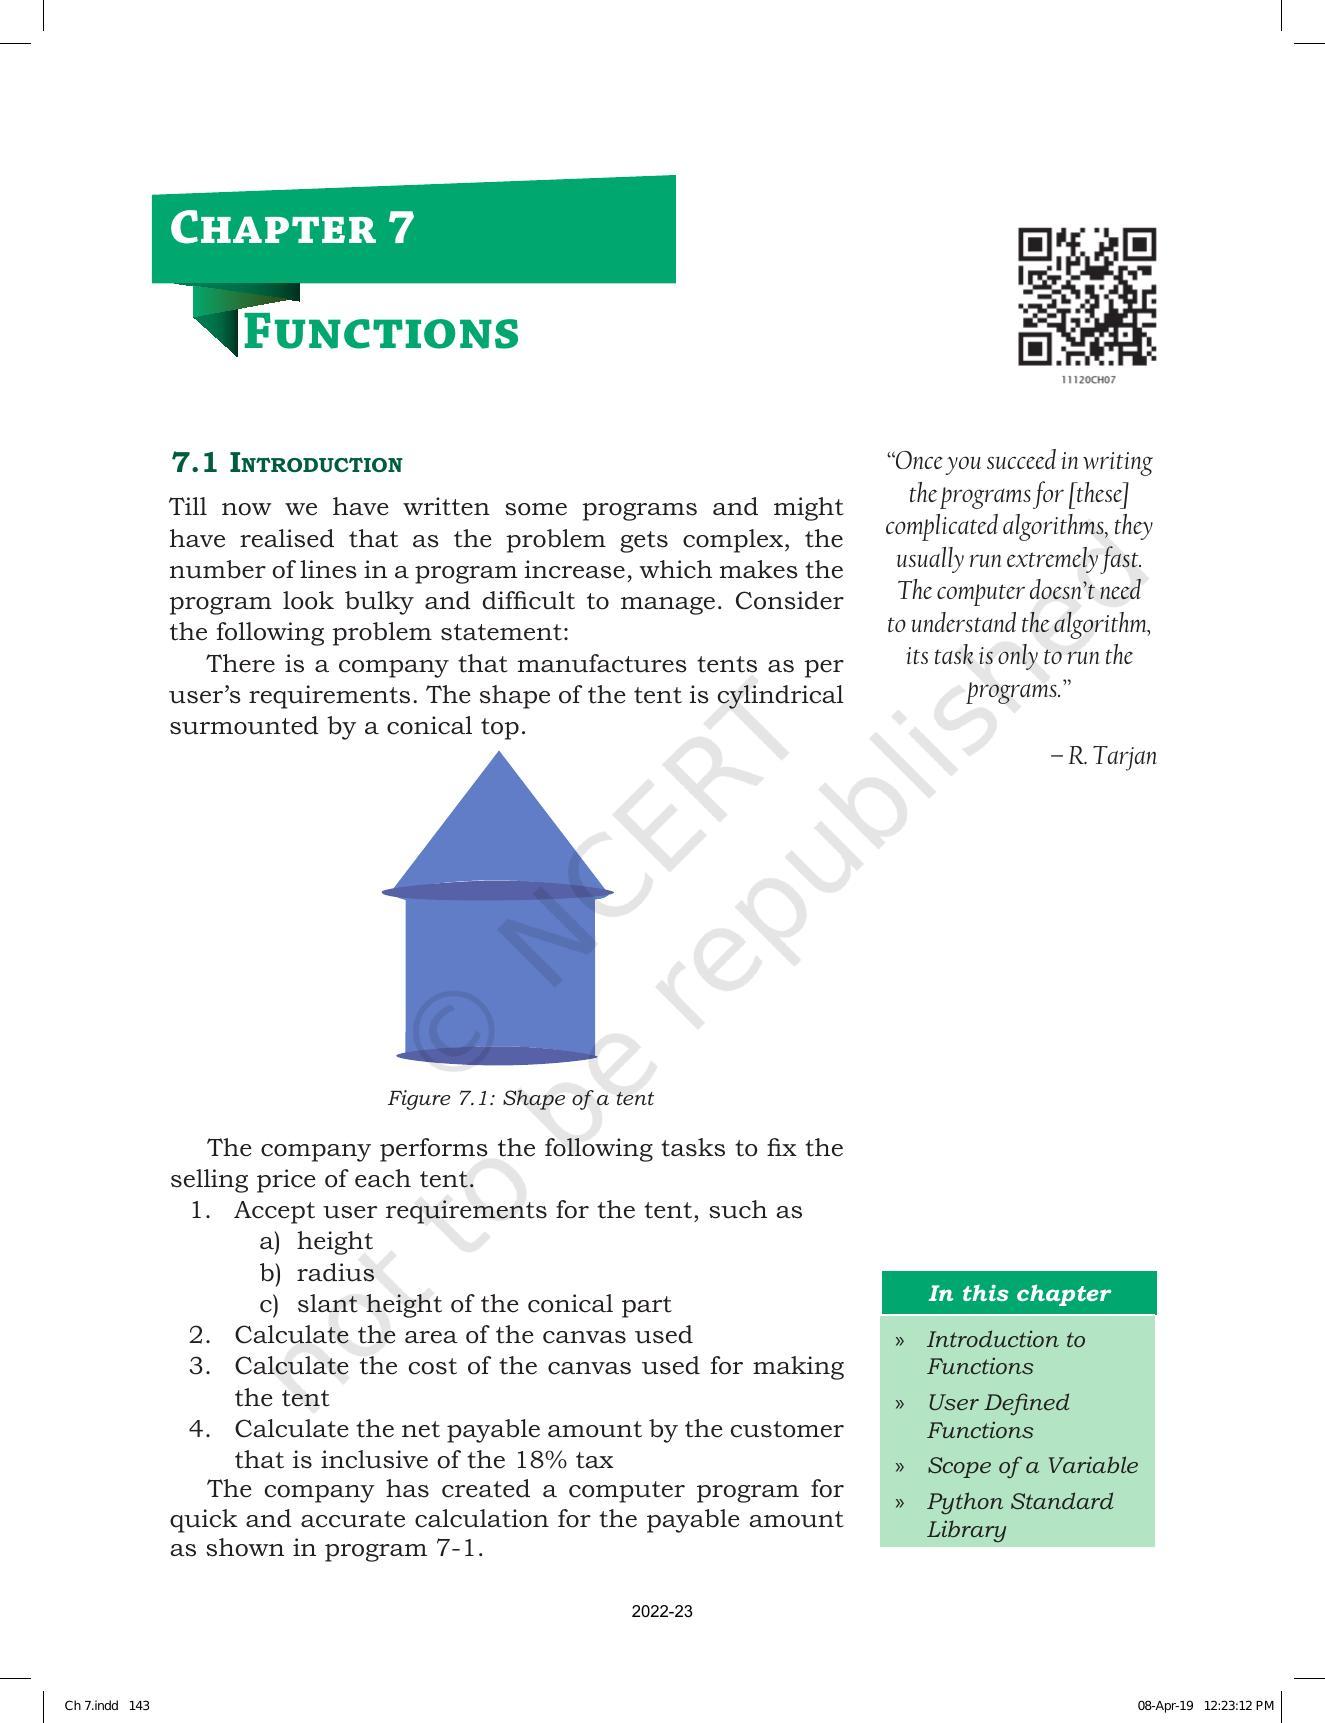 NCERT Book for Class 11 Computer Science Chapter 7 Functions - Page 1